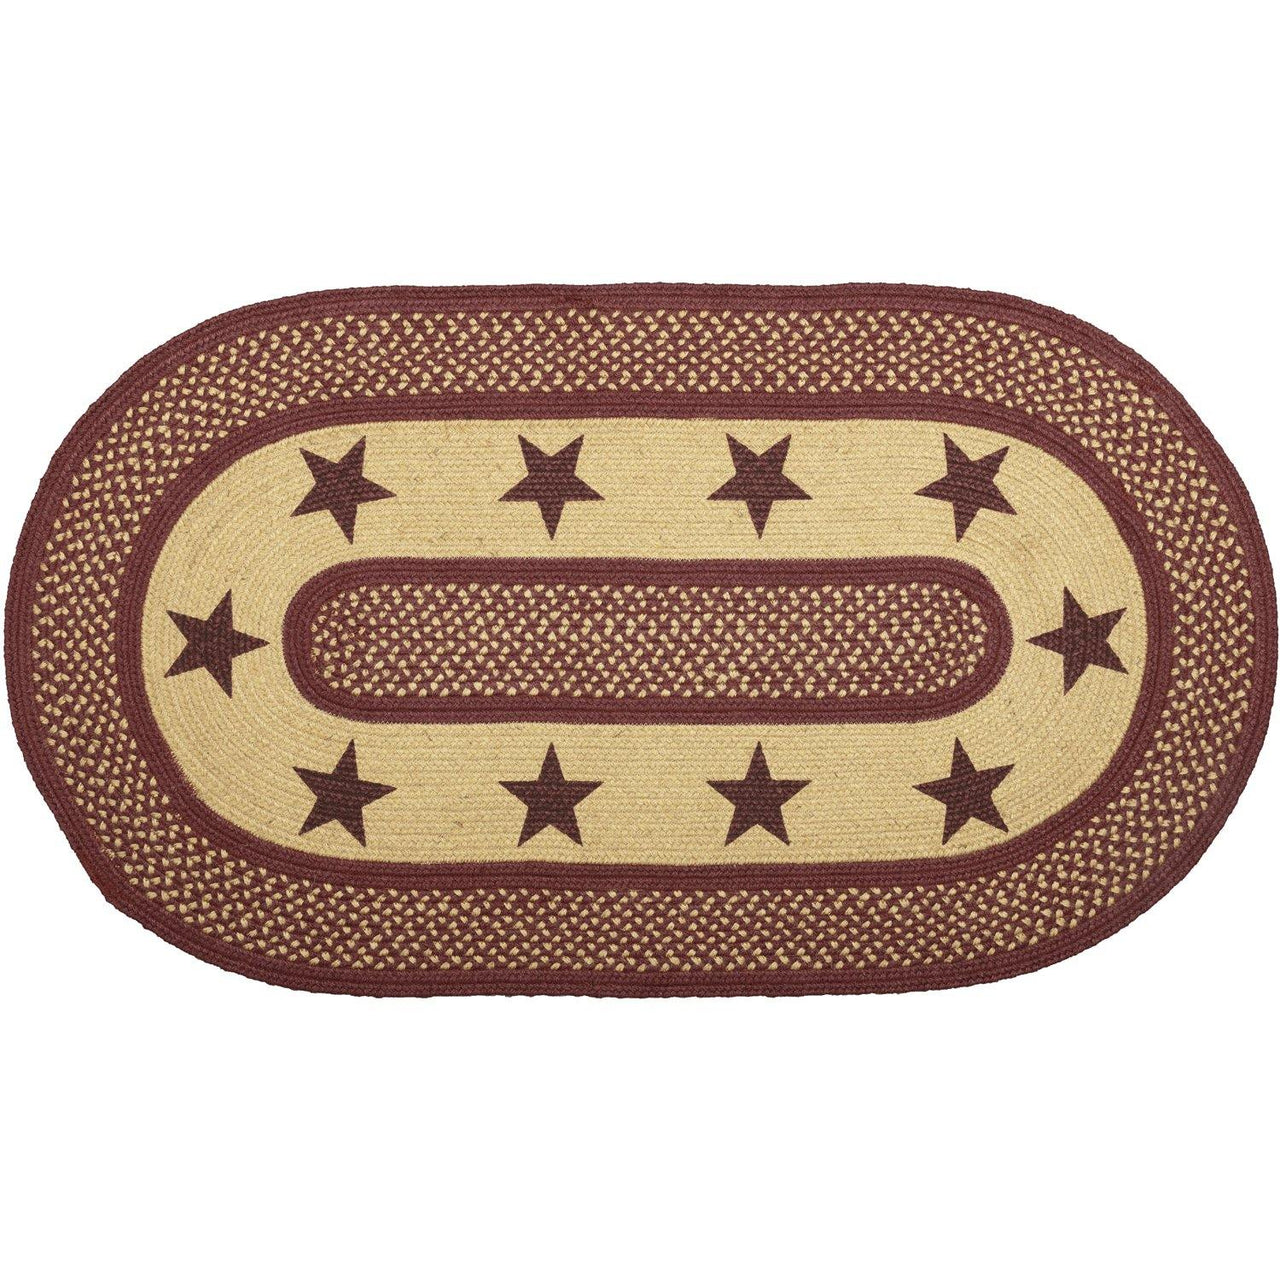 Burgundy Red Primitive Jute Braided Rug Oval Stencil Stars 27"x48" with Rug Pad VHC Brands - The Fox Decor